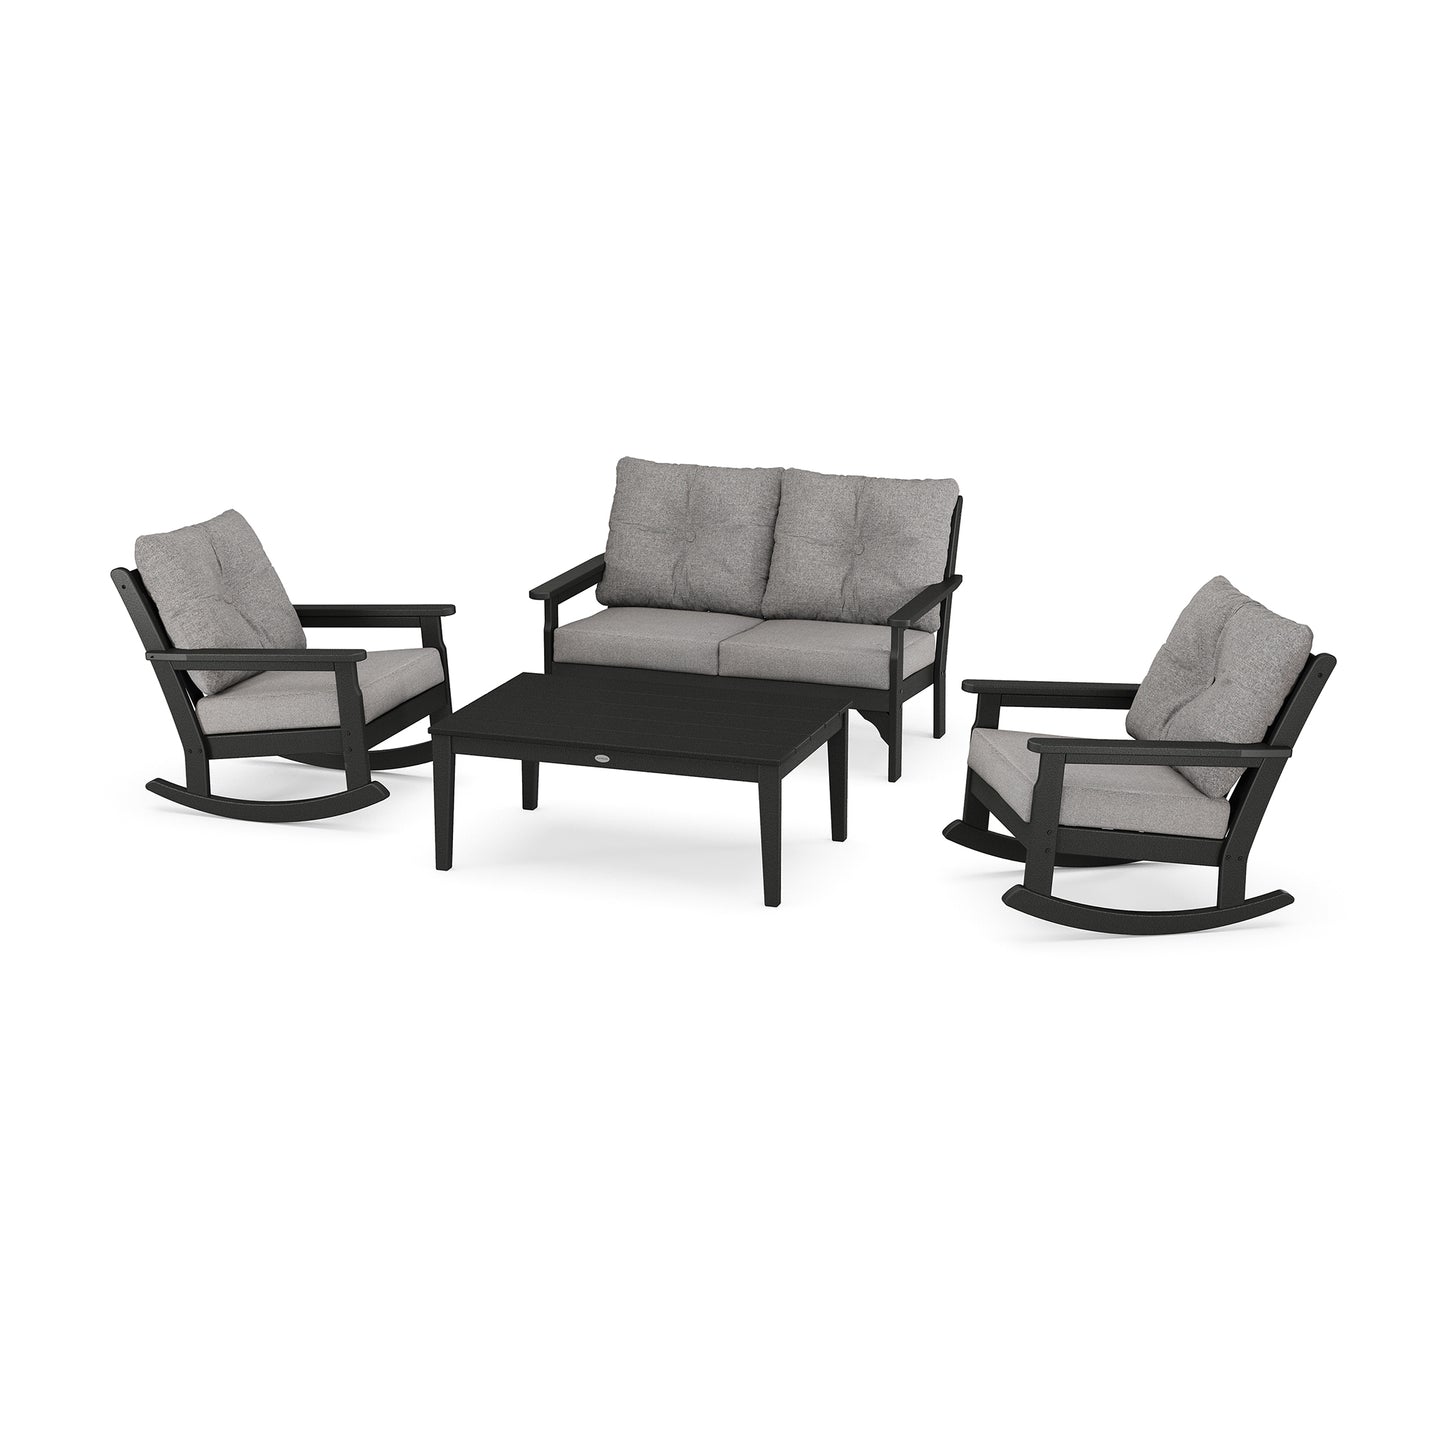 Four-piece POLYWOOD Vineyard Deep Seating Set featuring two rocking chairs, a sofa, and a coffee table, all in black with gray cushions, isolated on a white background.